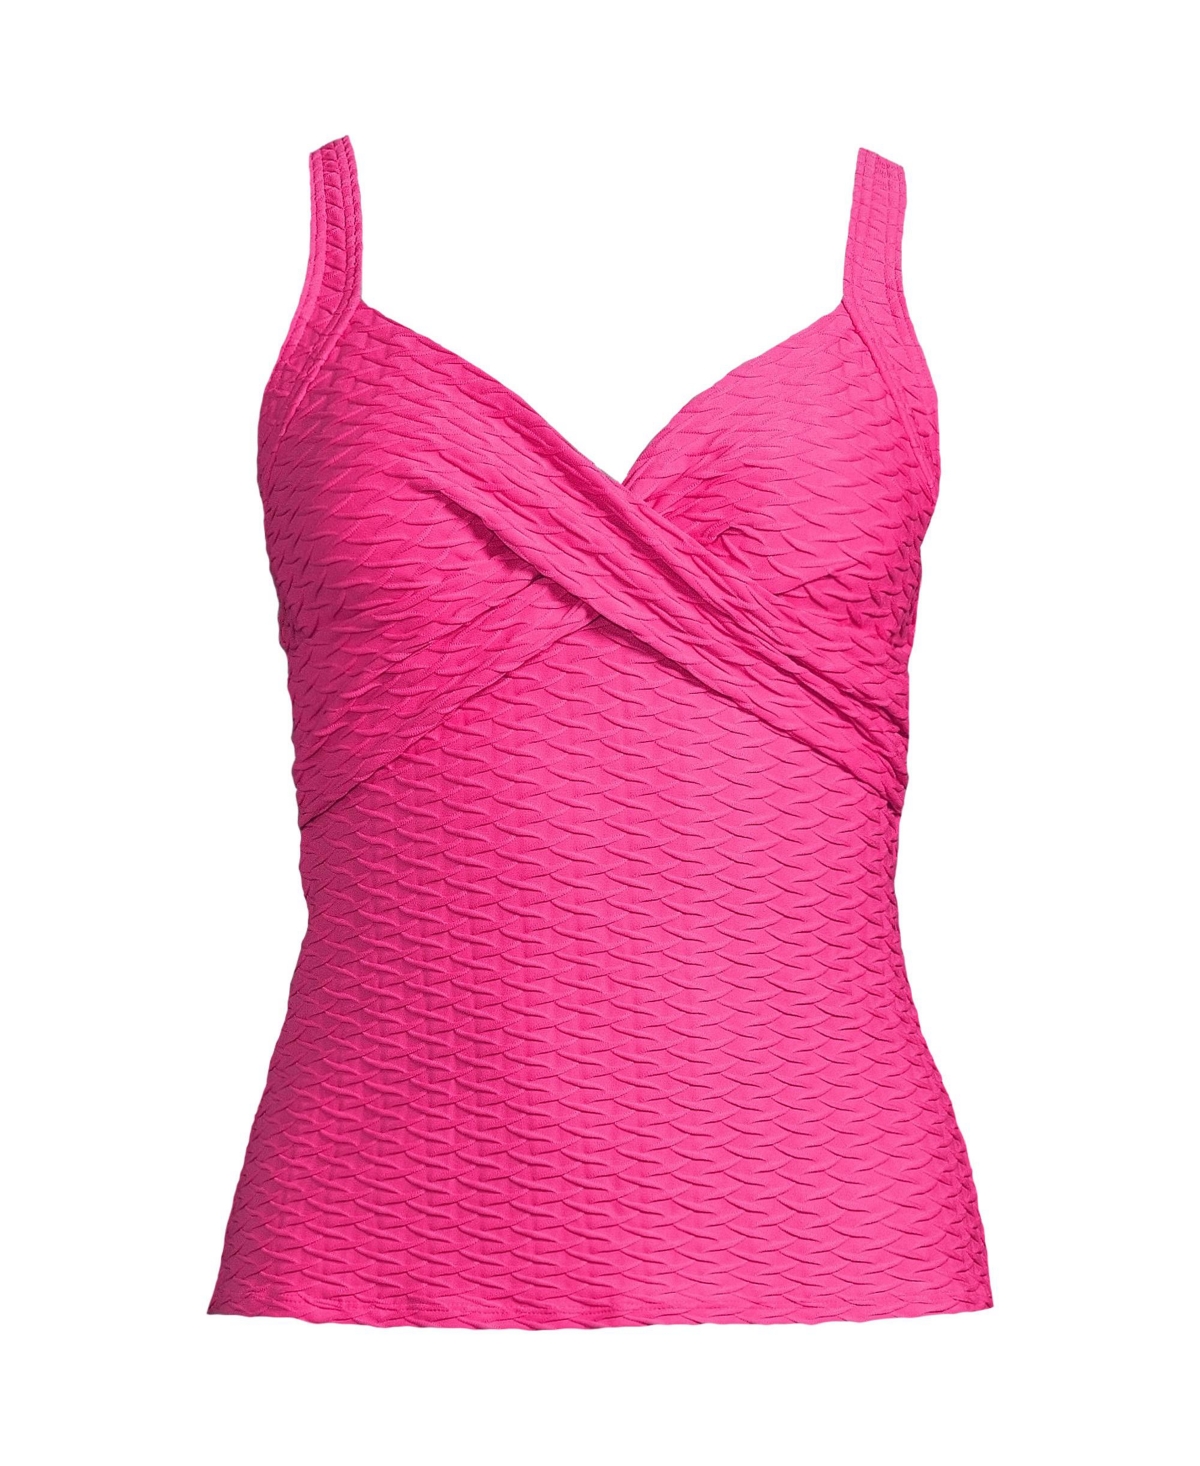 Women's Texture Underwire Wrap Tankini Swimsuit Top - Prism pink